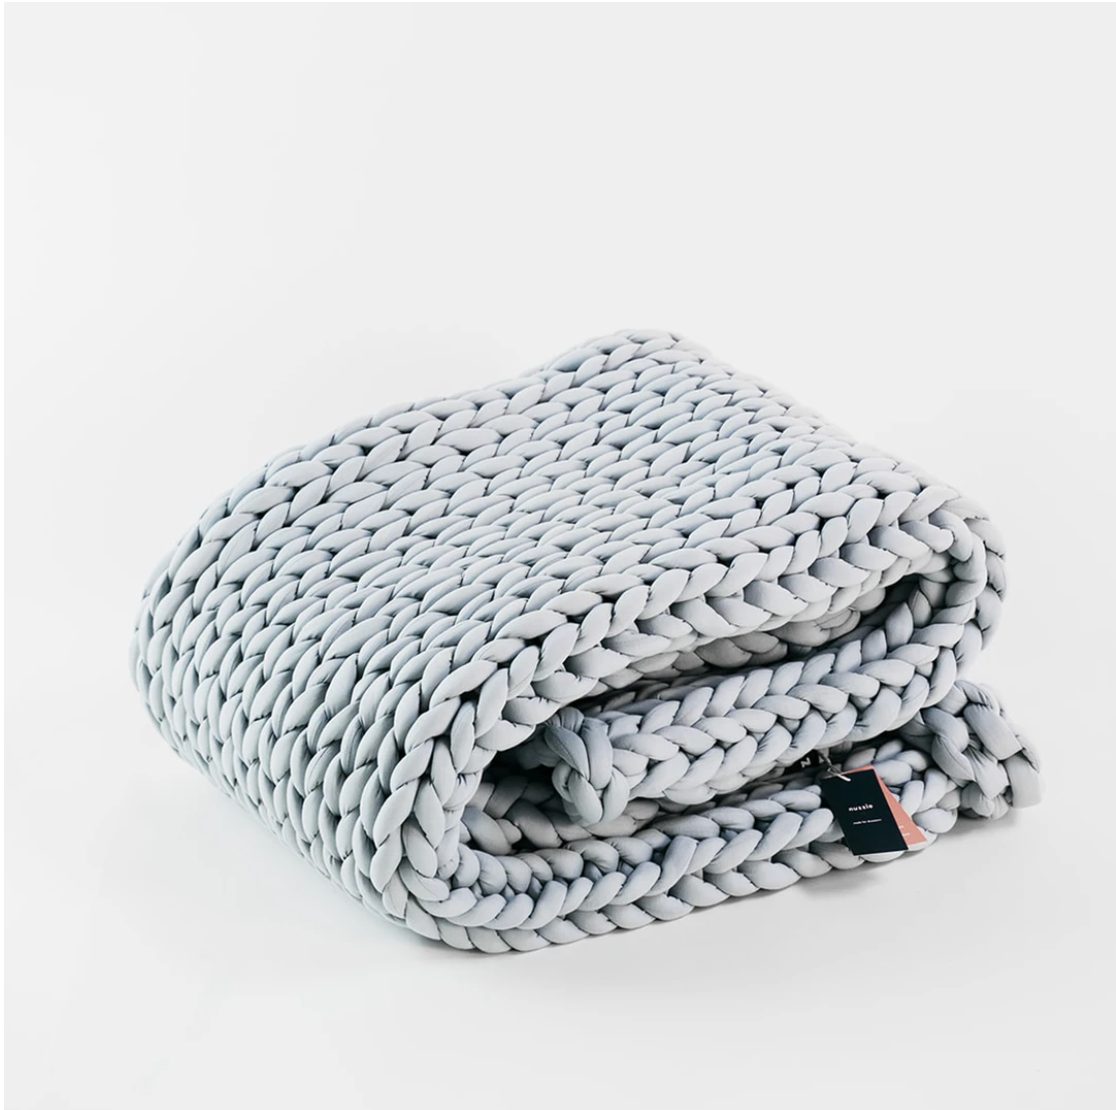 Weighted Woven Dream Throw